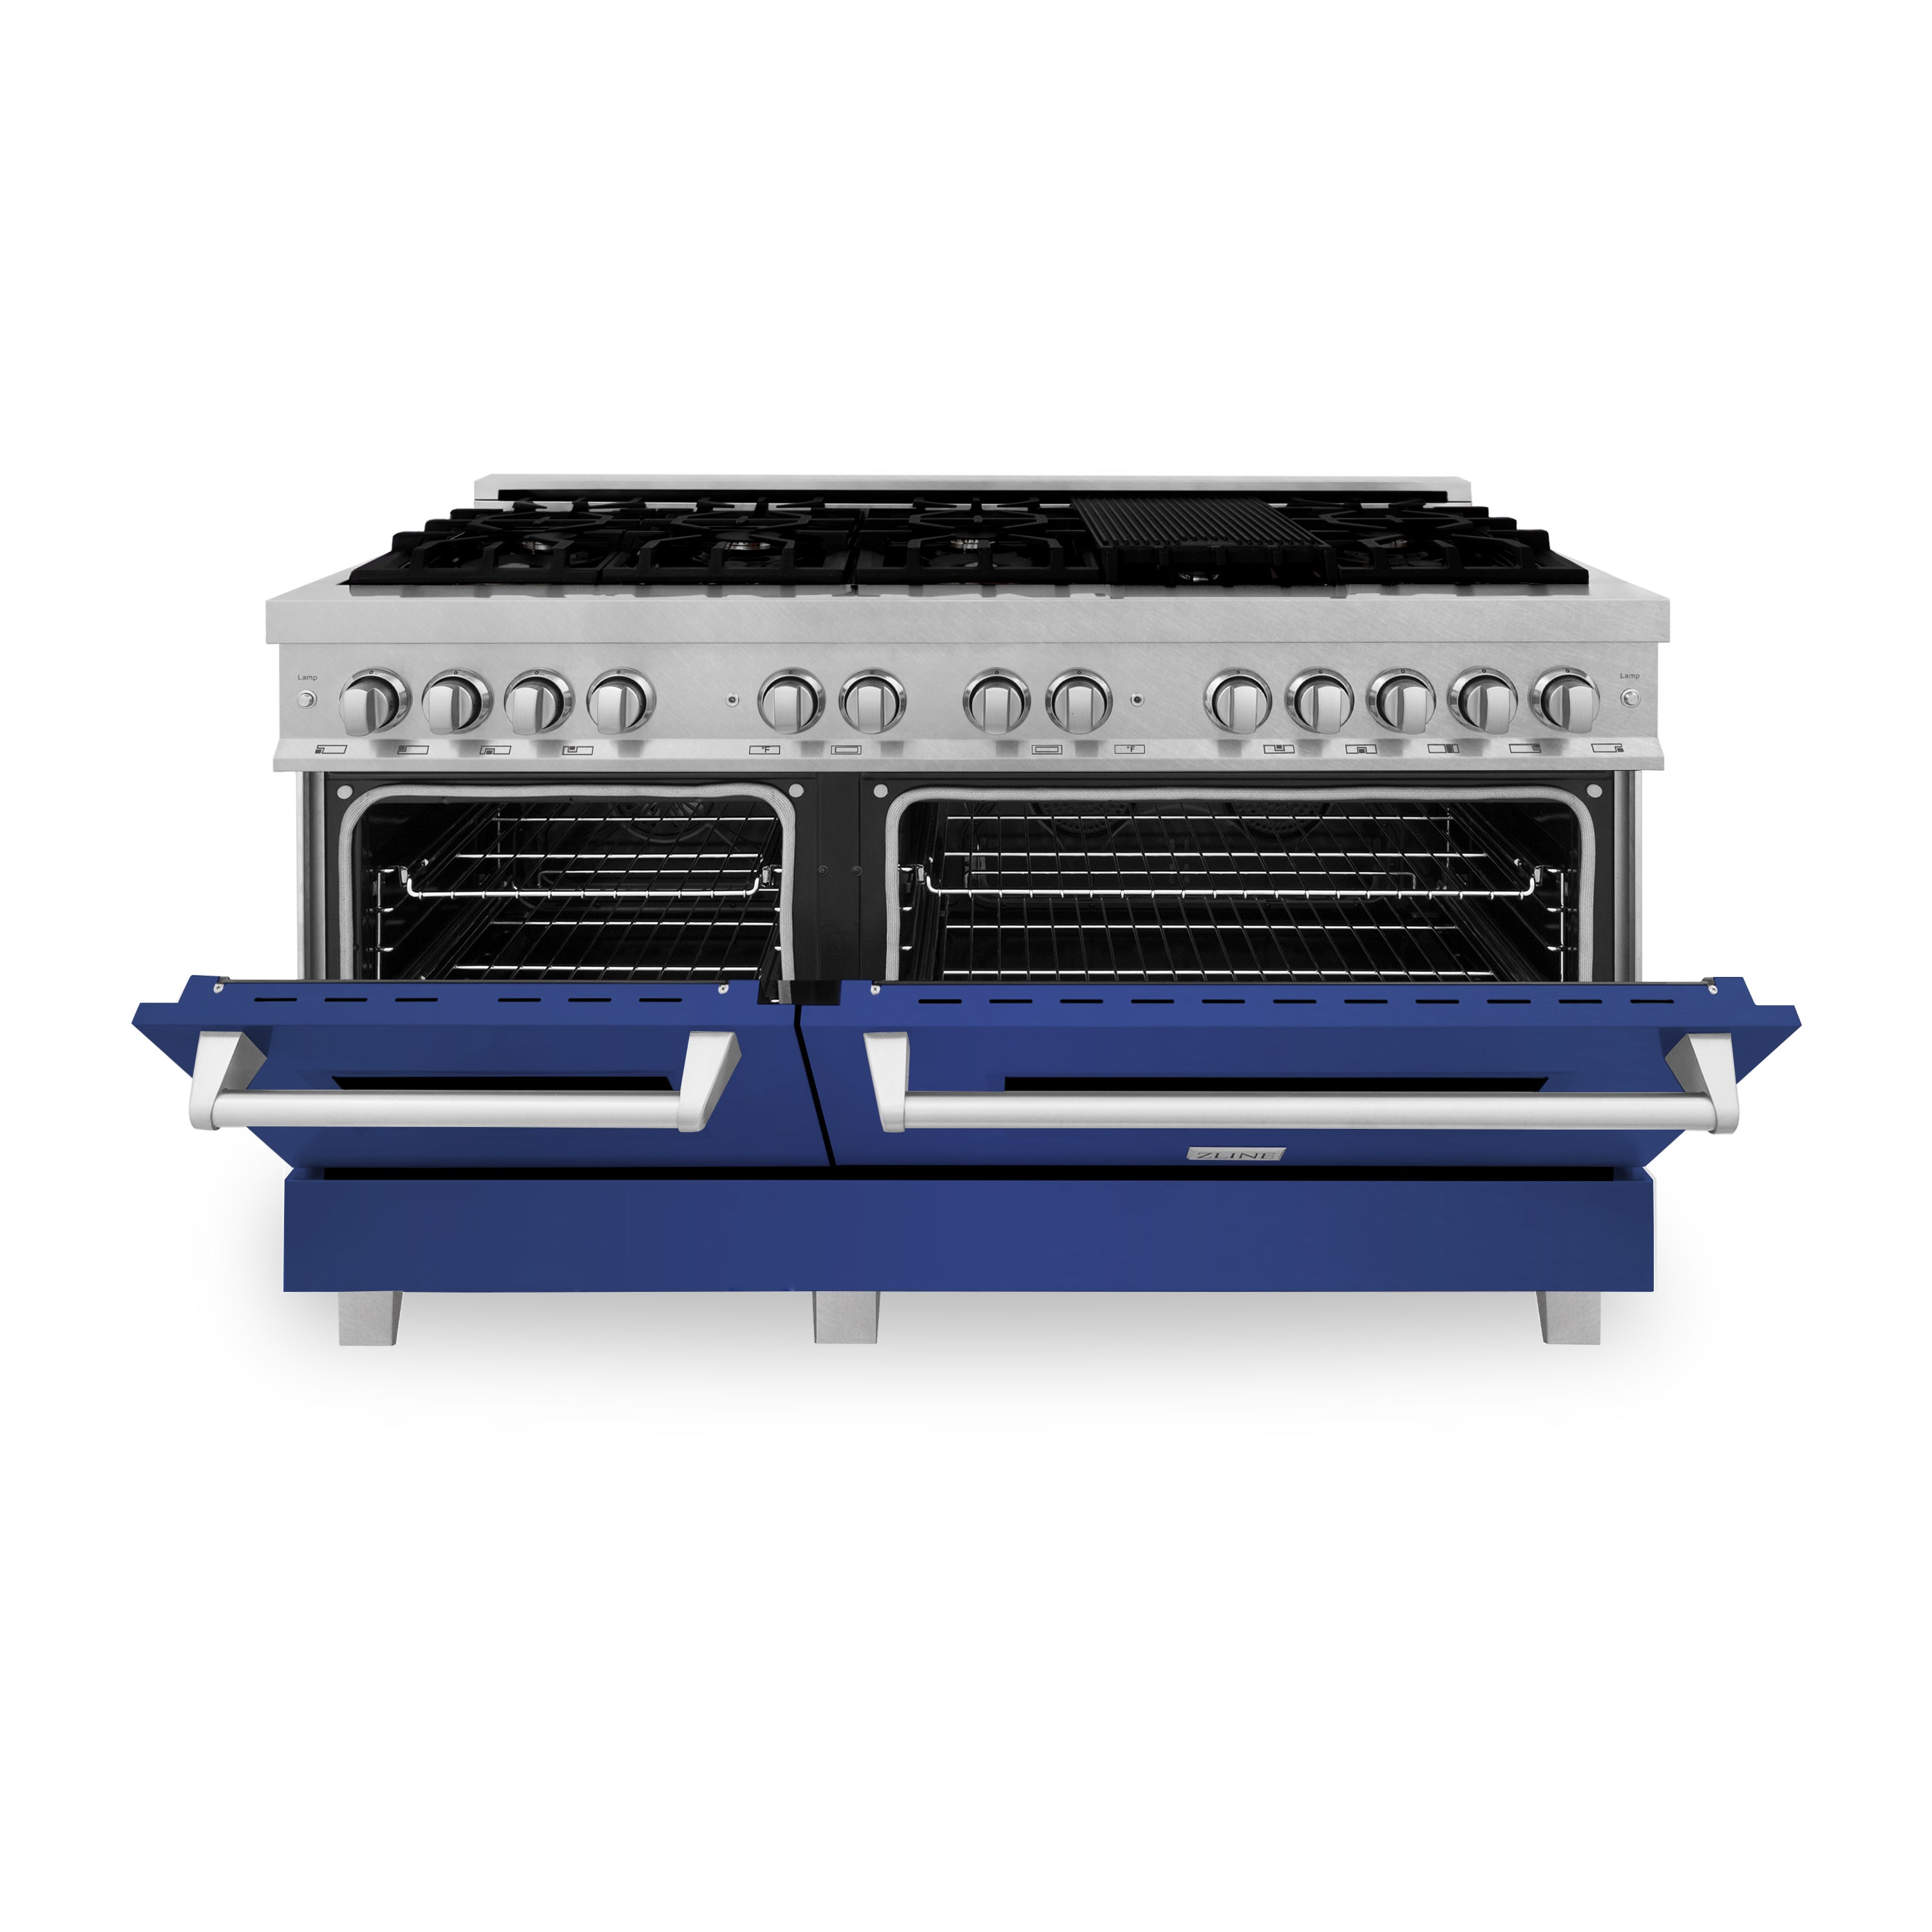 ZLINE 60" 7.4 cu. ft. Dual Fuel Range with Gas Stove and Electric Oven in Fingerprint Resistant Stainless Steel (RAS-60)